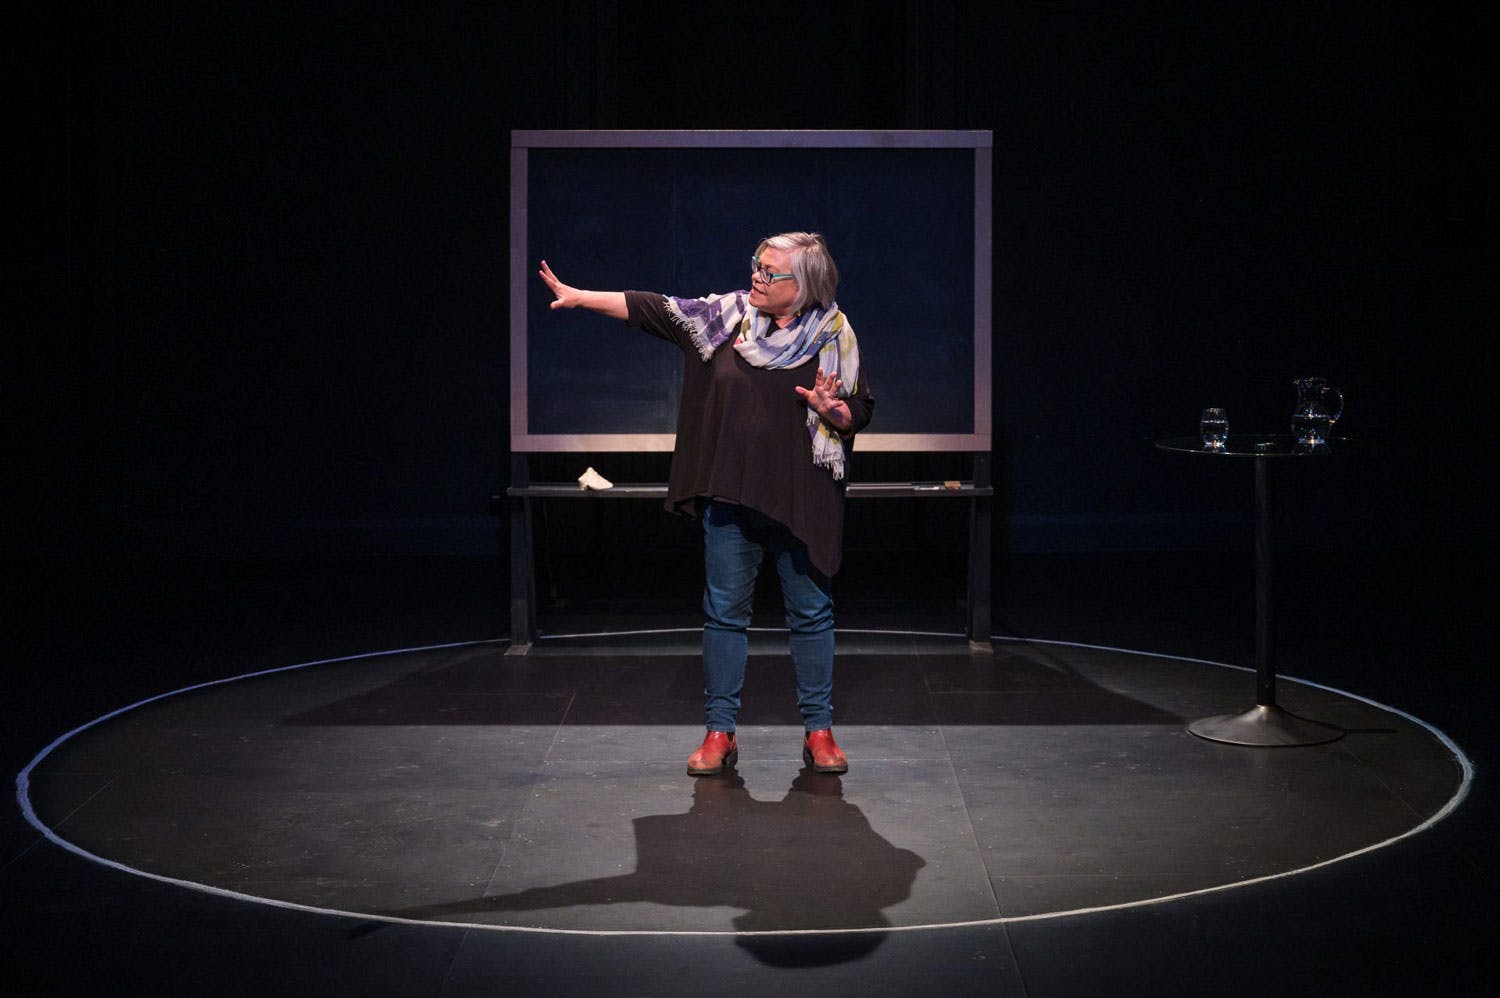 Alanna Mitchell on stage, right hand held out, in front of a chalkboard. She has light skin, short grey hair, and glasses.